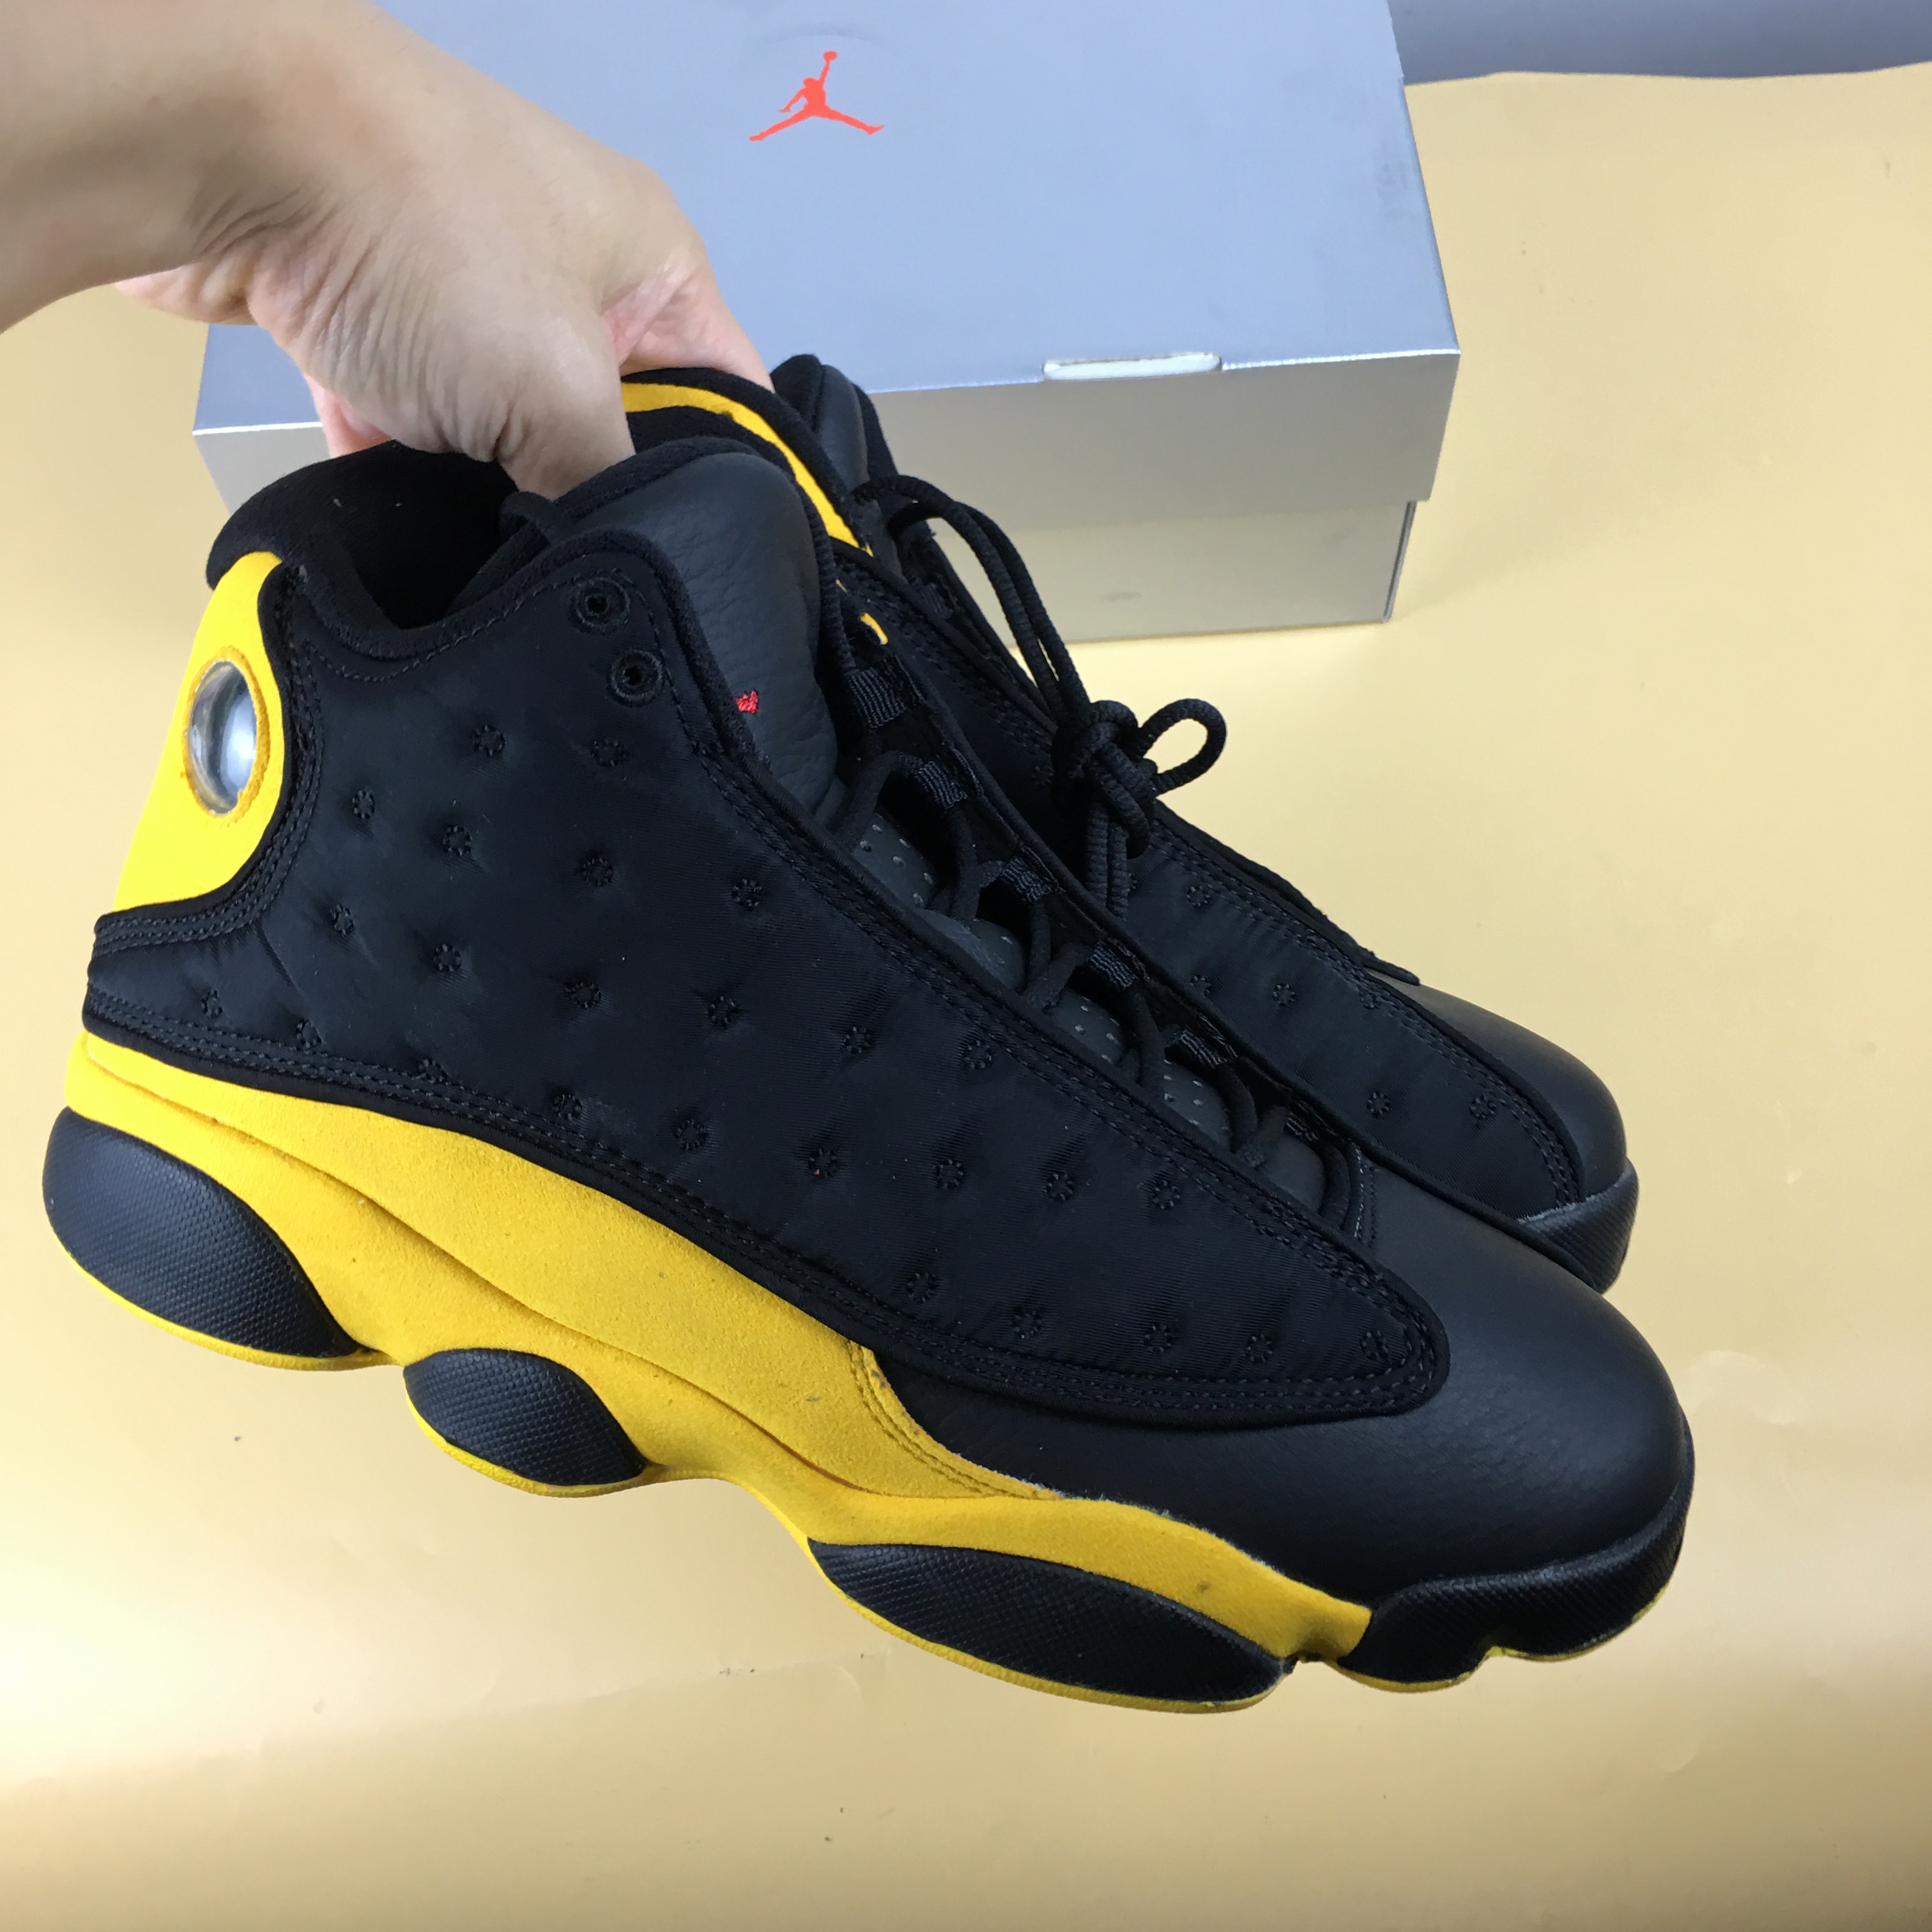 Air Jordan 13 Melo Class of 2003 Black Yellow Red Shoes